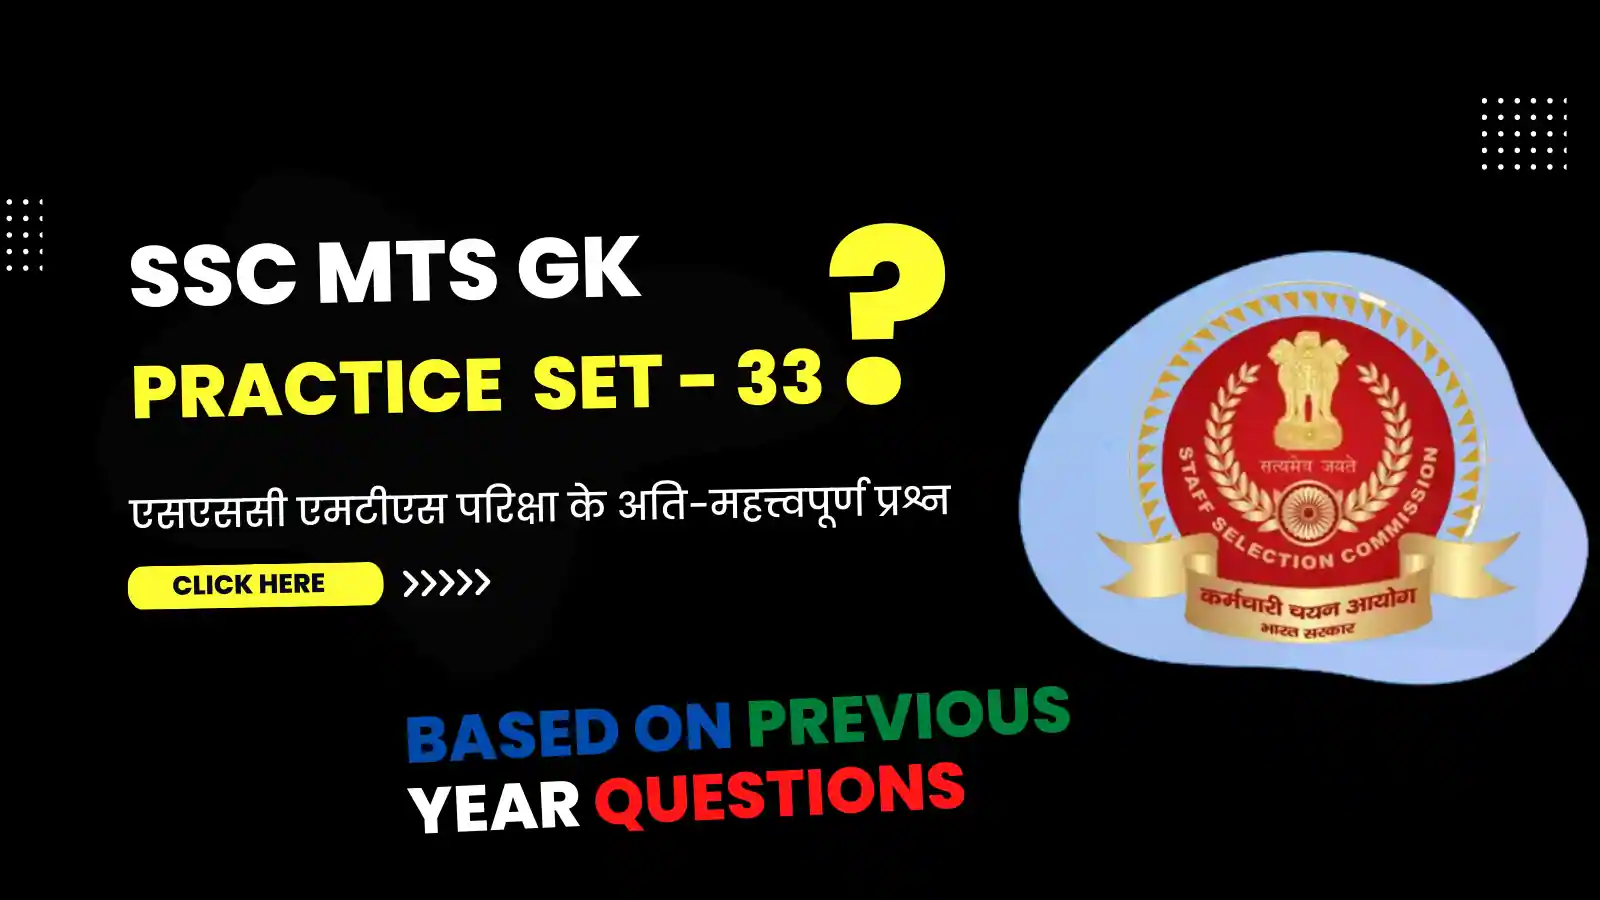 SSC MTS GK Question Practice Set in Hindi - 33